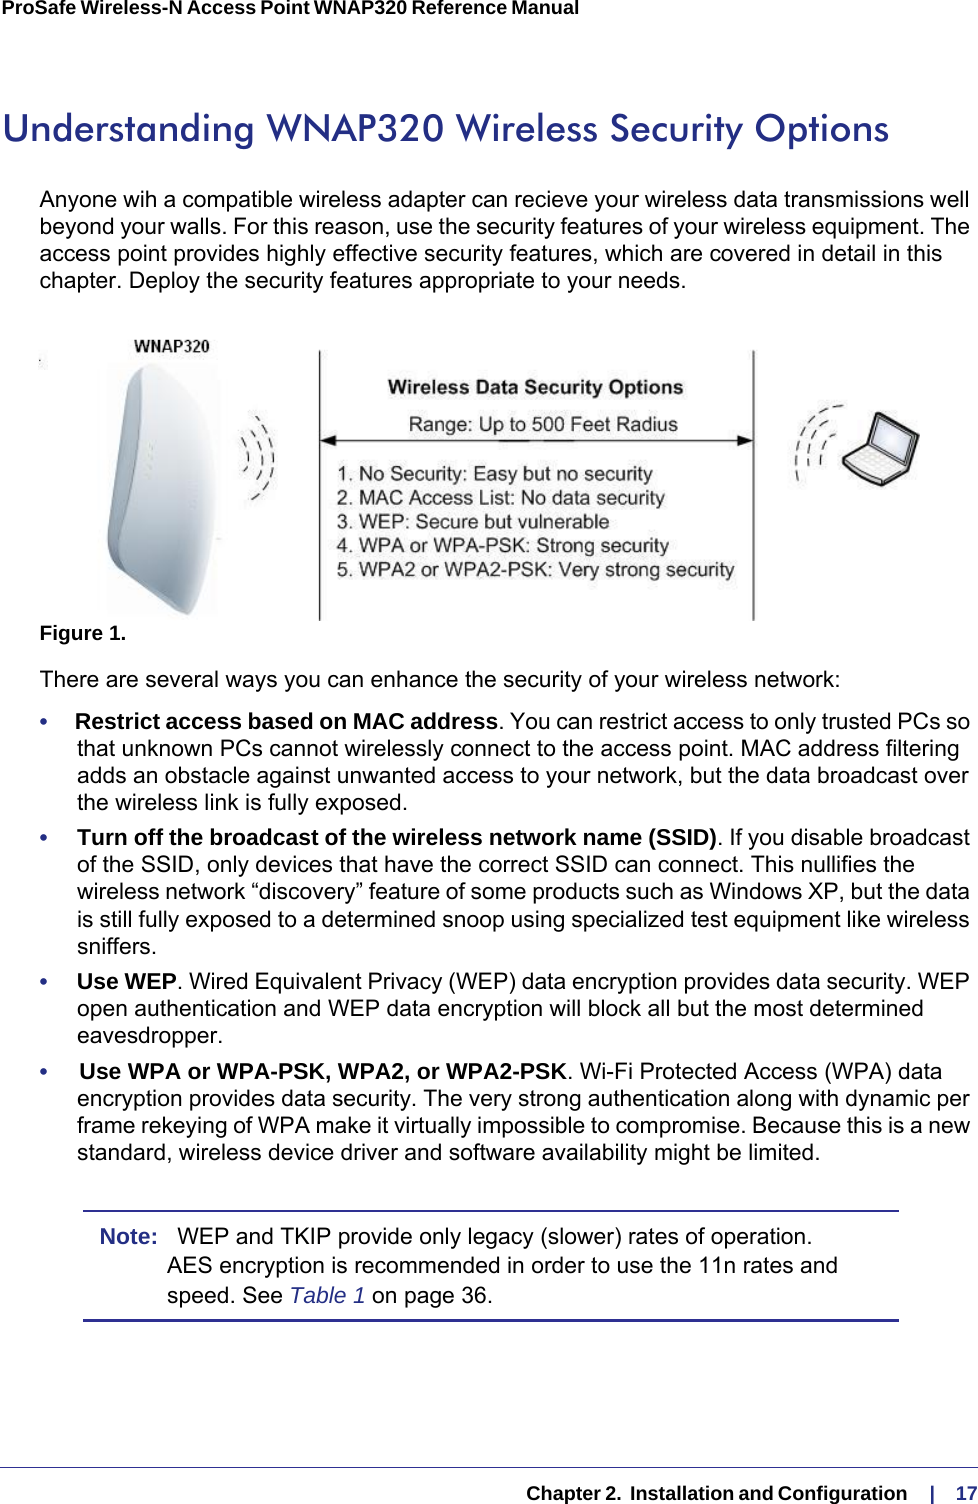   Chapter 2.  Installation and Configuration     |    17ProSafe Wireless-N Access Point WNAP320 Reference Manual Understanding WNAP320 Wireless Security OptionsAnyone wih a compatible wireless adapter can recieve your wireless data transmissions well beyond your walls. For this reason, use the security features of your wireless equipment. The access point provides highly effective security features, which are covered in detail in this chapter. Deploy the security features appropriate to your needs.Figure 1. There are several ways you can enhance the security of your wireless network:•     Restrict access based on MAC address. You can restrict access to only trusted PCs so that unknown PCs cannot wirelessly connect to the access point. MAC address filtering adds an obstacle against unwanted access to your network, but the data broadcast over the wireless link is fully exposed. •     Turn off the broadcast of the wireless network name (SSID). If you disable broadcast of the SSID, only devices that have the correct SSID can connect. This nullifies the wireless network “discovery” feature of some products such as Windows XP, but the data is still fully exposed to a determined snoop using specialized test equipment like wireless sniffers.•     Use WEP. Wired Equivalent Privacy (WEP) data encryption provides data security. WEP open authentication and WEP data encryption will block all but the most determined eavesdropper. •     Use WPA or WPA-PSK, WPA2, or WPA2-PSK. Wi-Fi Protected Access (WPA) data encryption provides data security. The very strong authentication along with dynamic per frame rekeying of WPA make it virtually impossible to compromise. Because this is a new standard, wireless device driver and software availability might be limited.Note:   WEP and TKIP provide only legacy (slower) rates of operation. AES encryption is recommended in order to use the 11n rates and speed. See Table  1 on page  36.